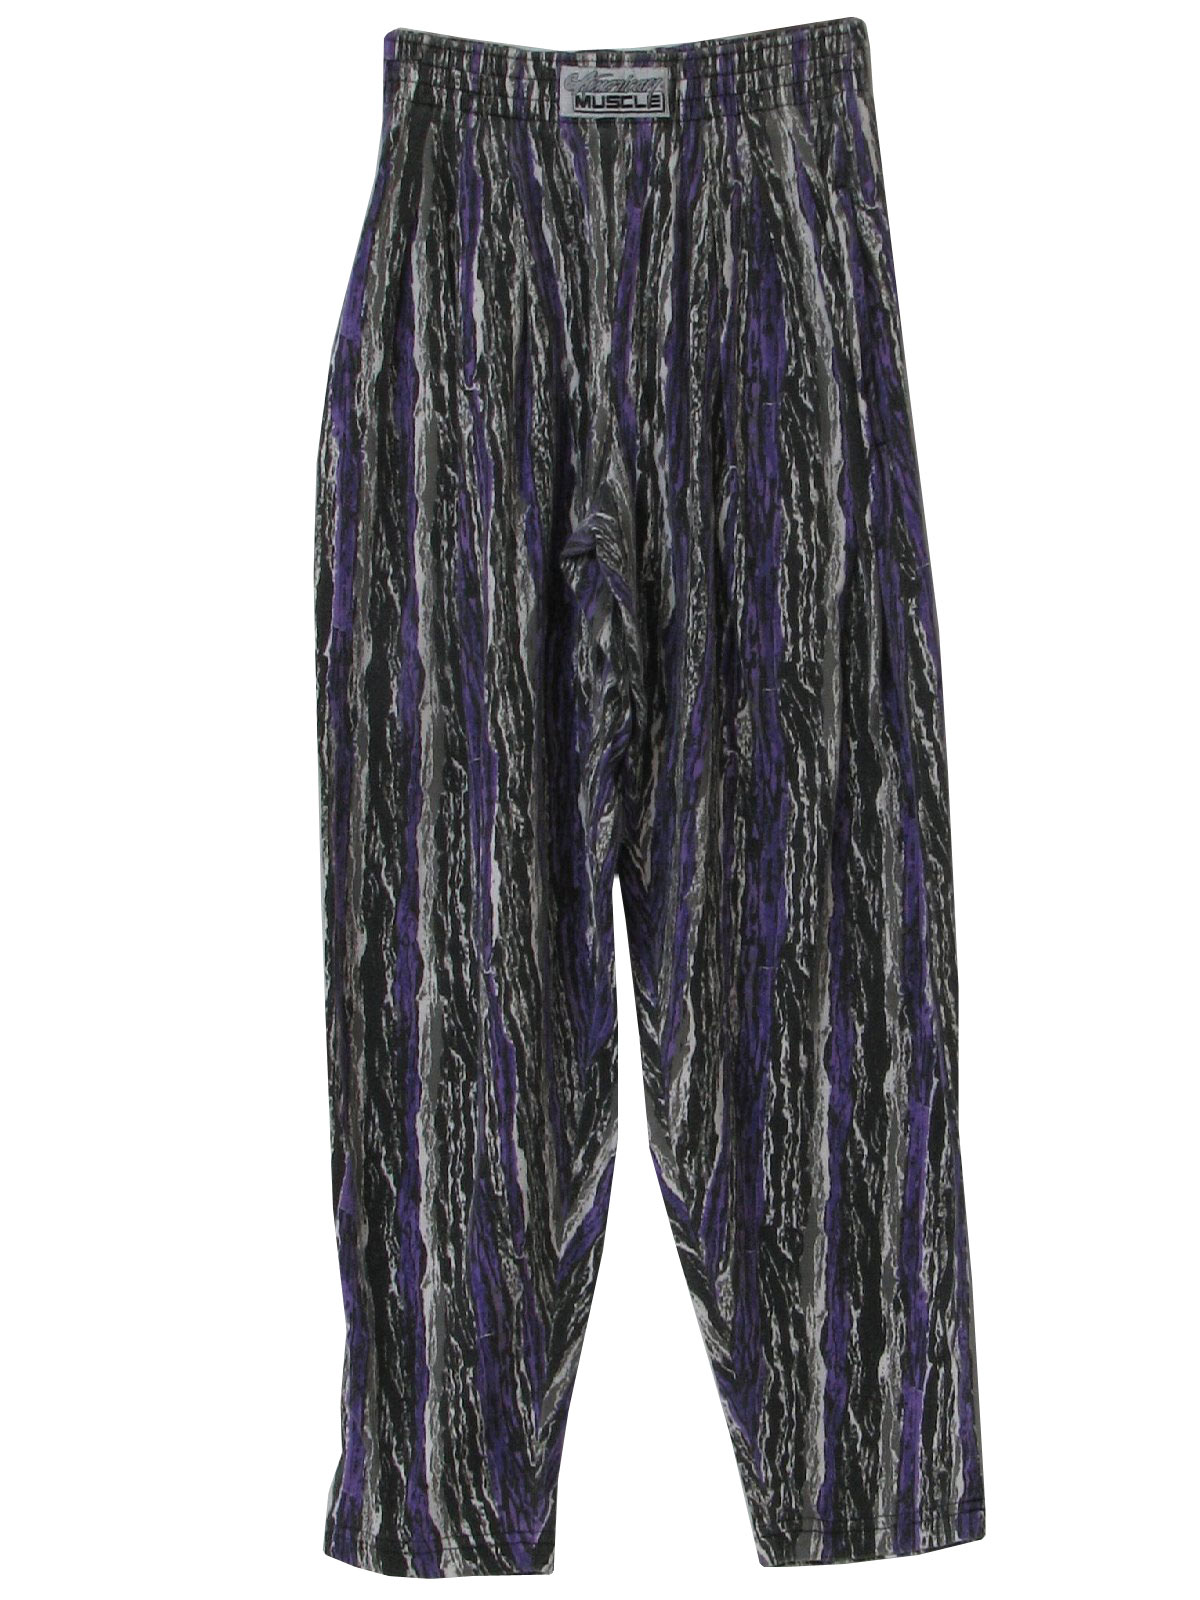 Retro 1980's Pants (American Muscle) : 80s -American Muscle- Here is your  rescue pack brother, keep these black, grey, white and black abstract  totally 80s animal print baggy pants in your car